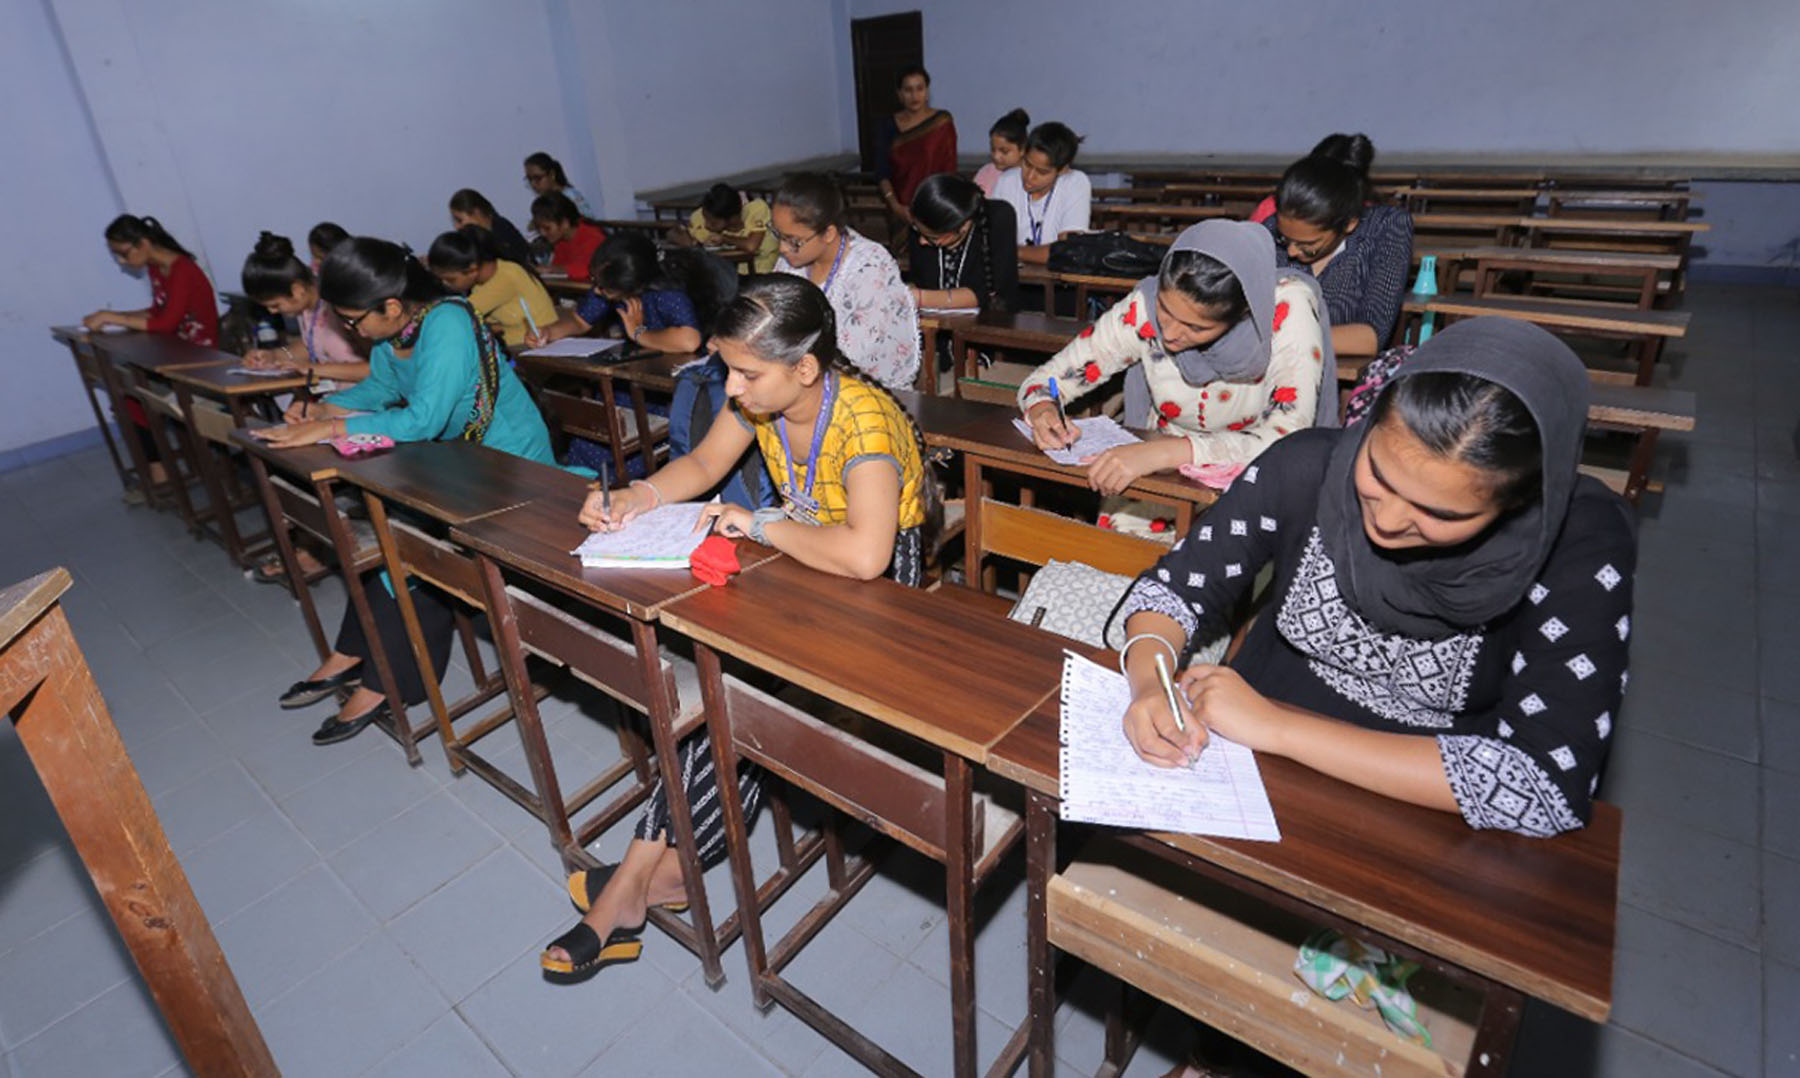 essay competition 2022 india for college students